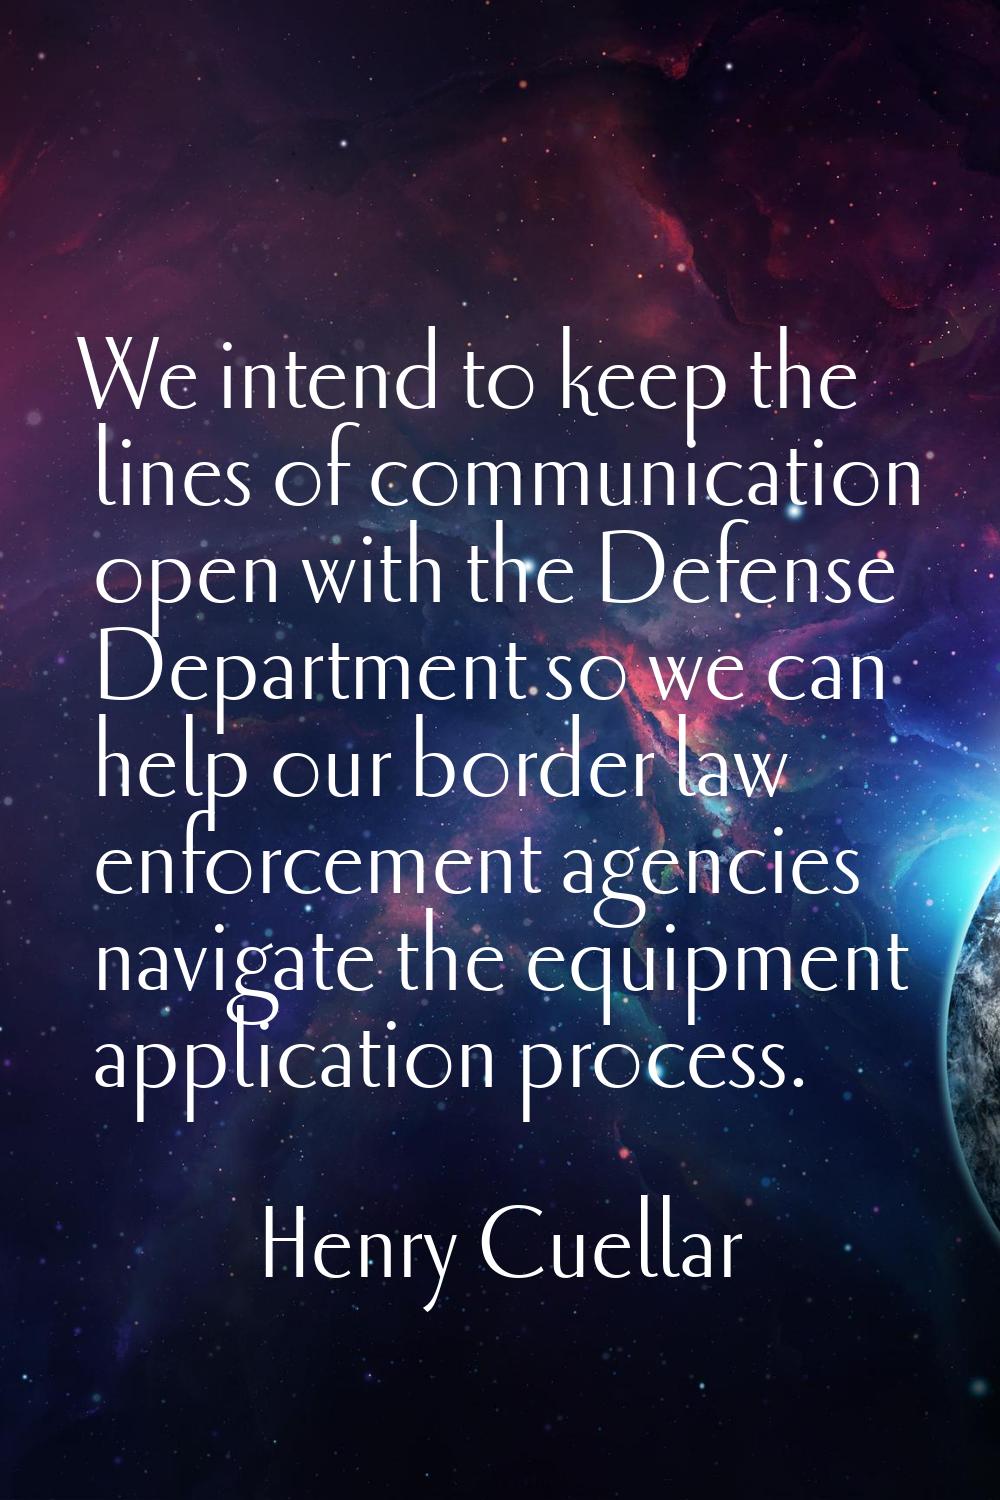 We intend to keep the lines of communication open with the Defense Department so we can help our bo